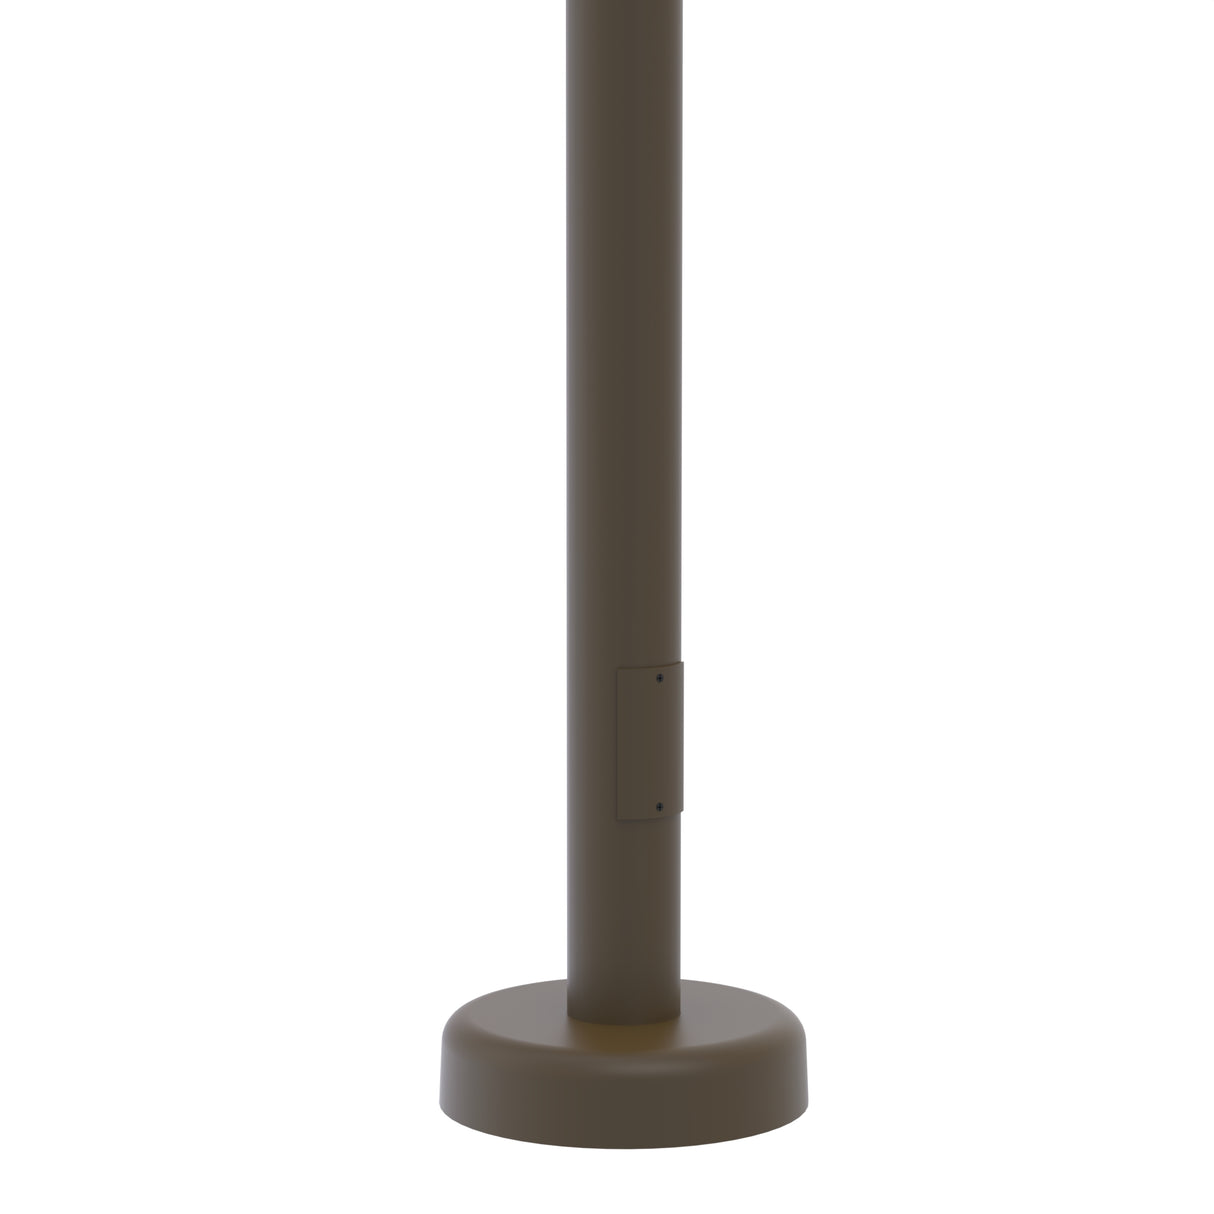 10' Tall x 4.0" OD x 0.125" Thick, Round Straight Aluminum, Hinged Anchor Base Light Pole